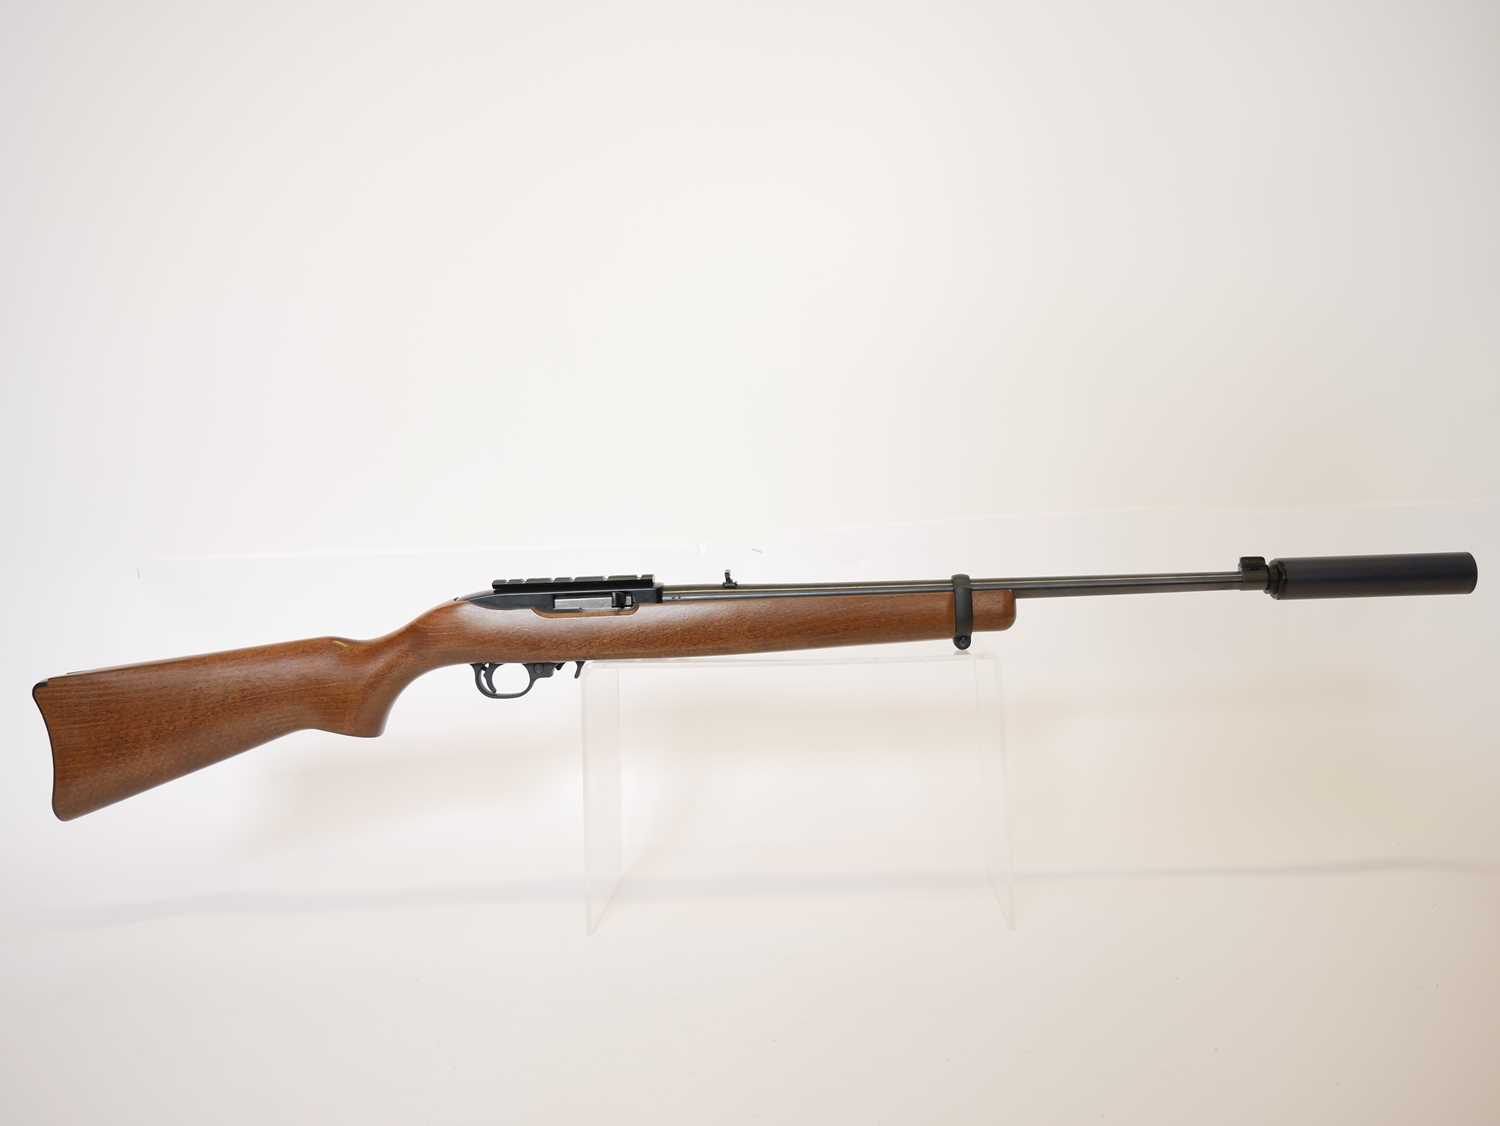 Ruger 10-22 .22lr semi auto rifle and moderator, serial number 356-73813, 16.5inch barrel fitted - Image 2 of 11